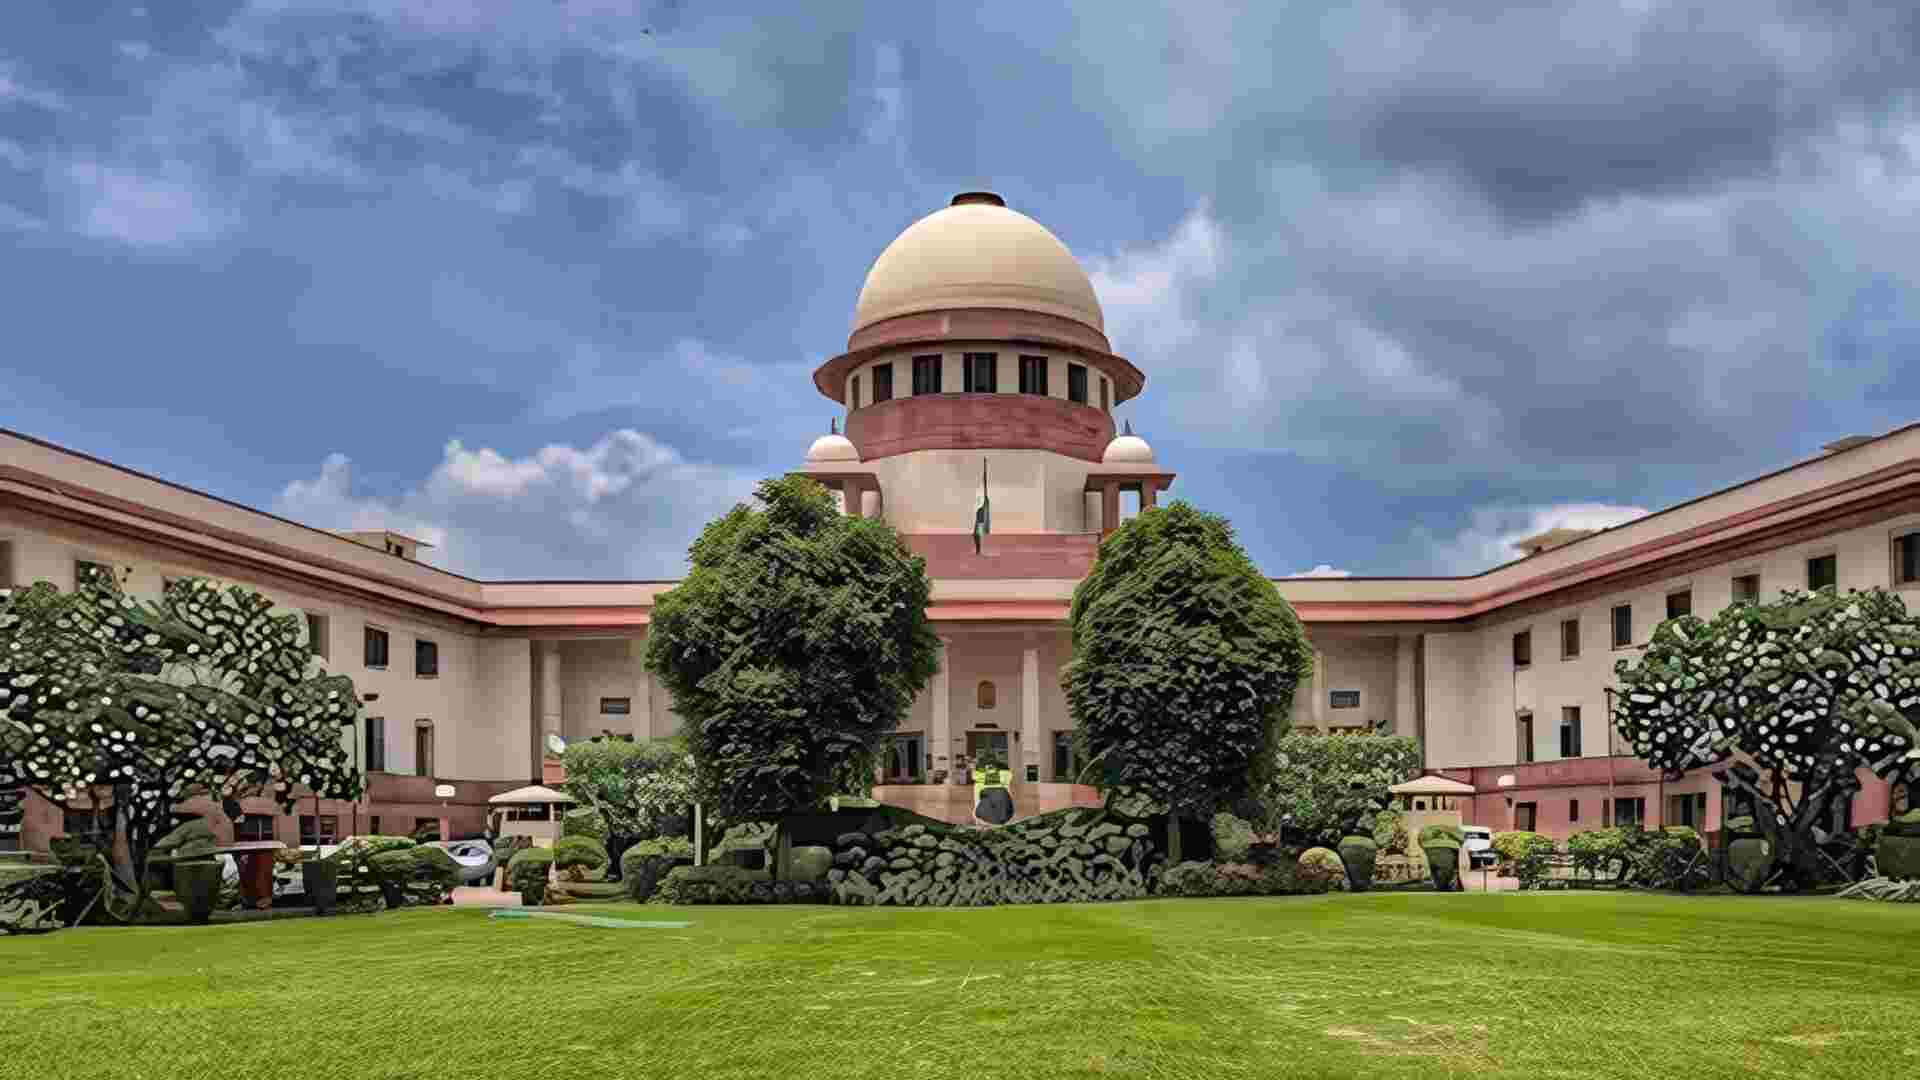 Supreme Court Reverses 1989 Ruling, Declares Royalty On Minerals ‘Not a Tax’